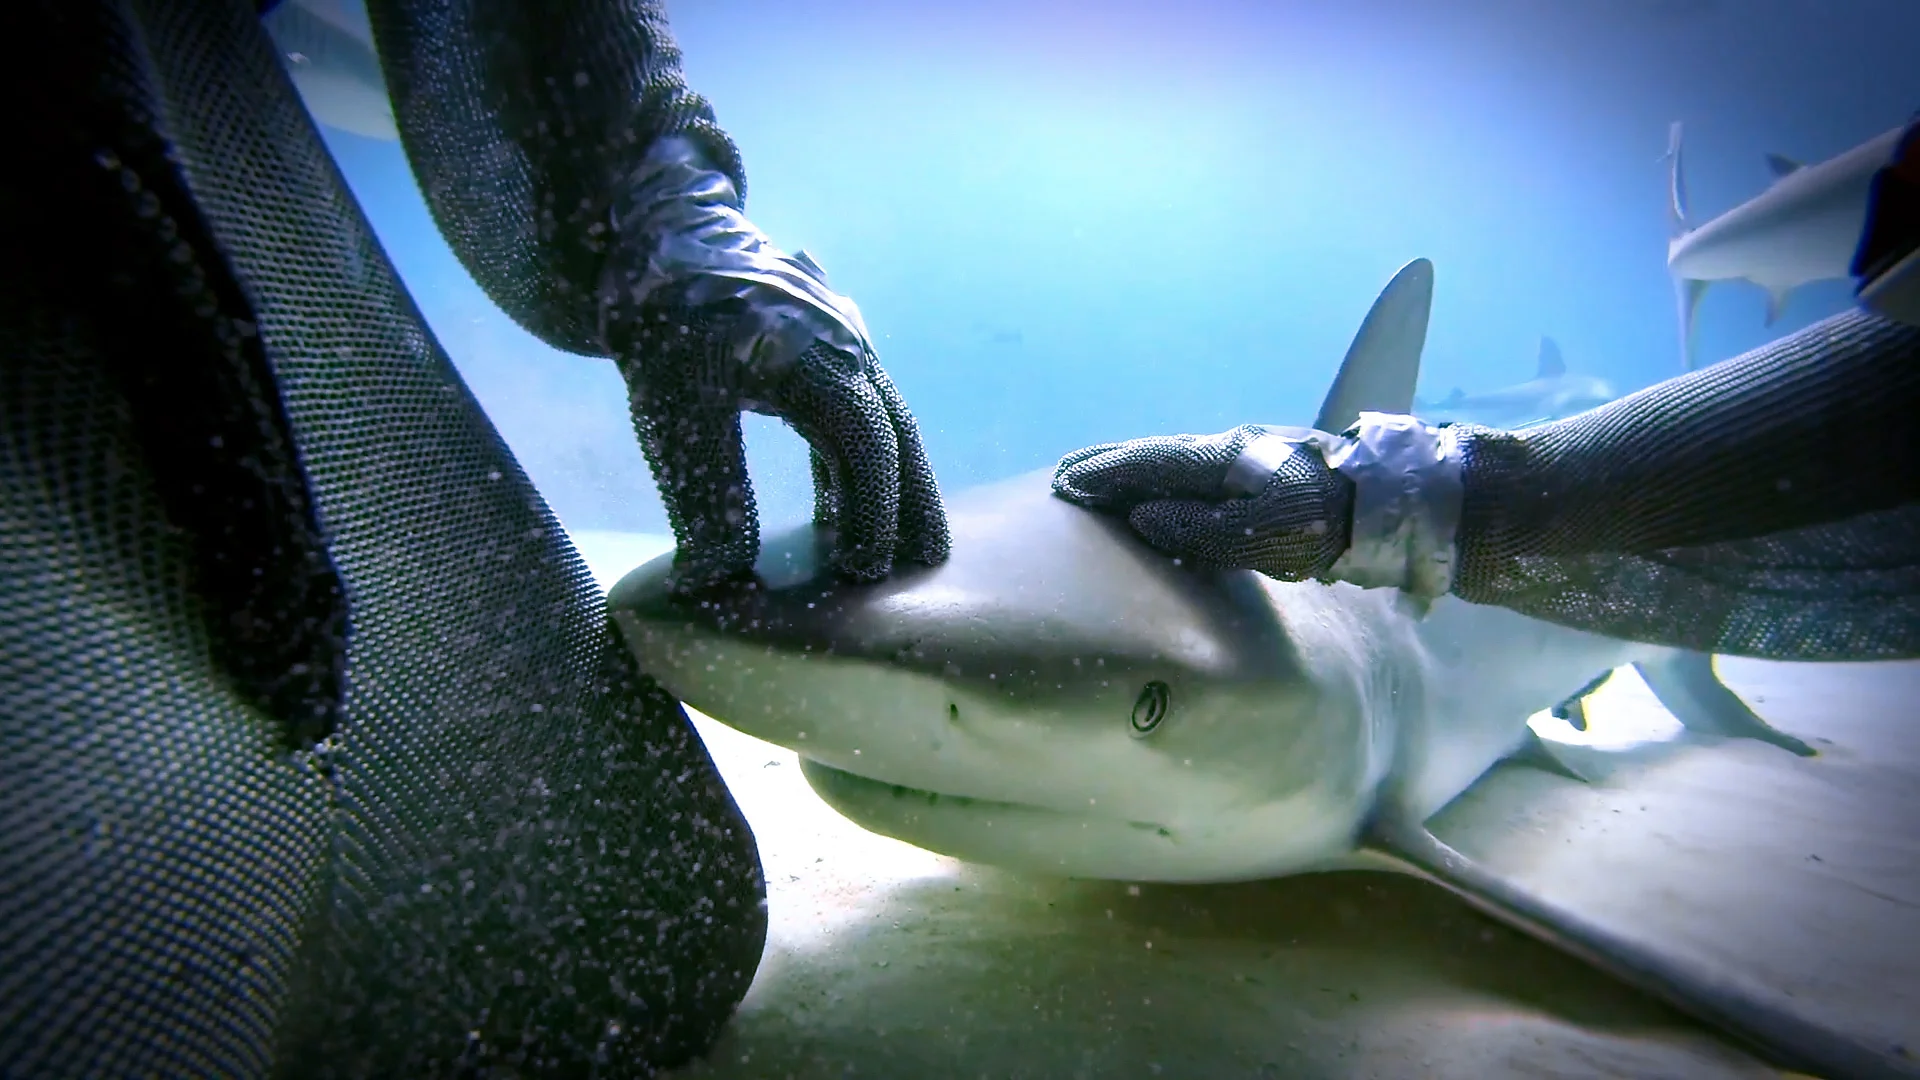 Meet the Shark Whisperer who sticks her hand in their mouths to